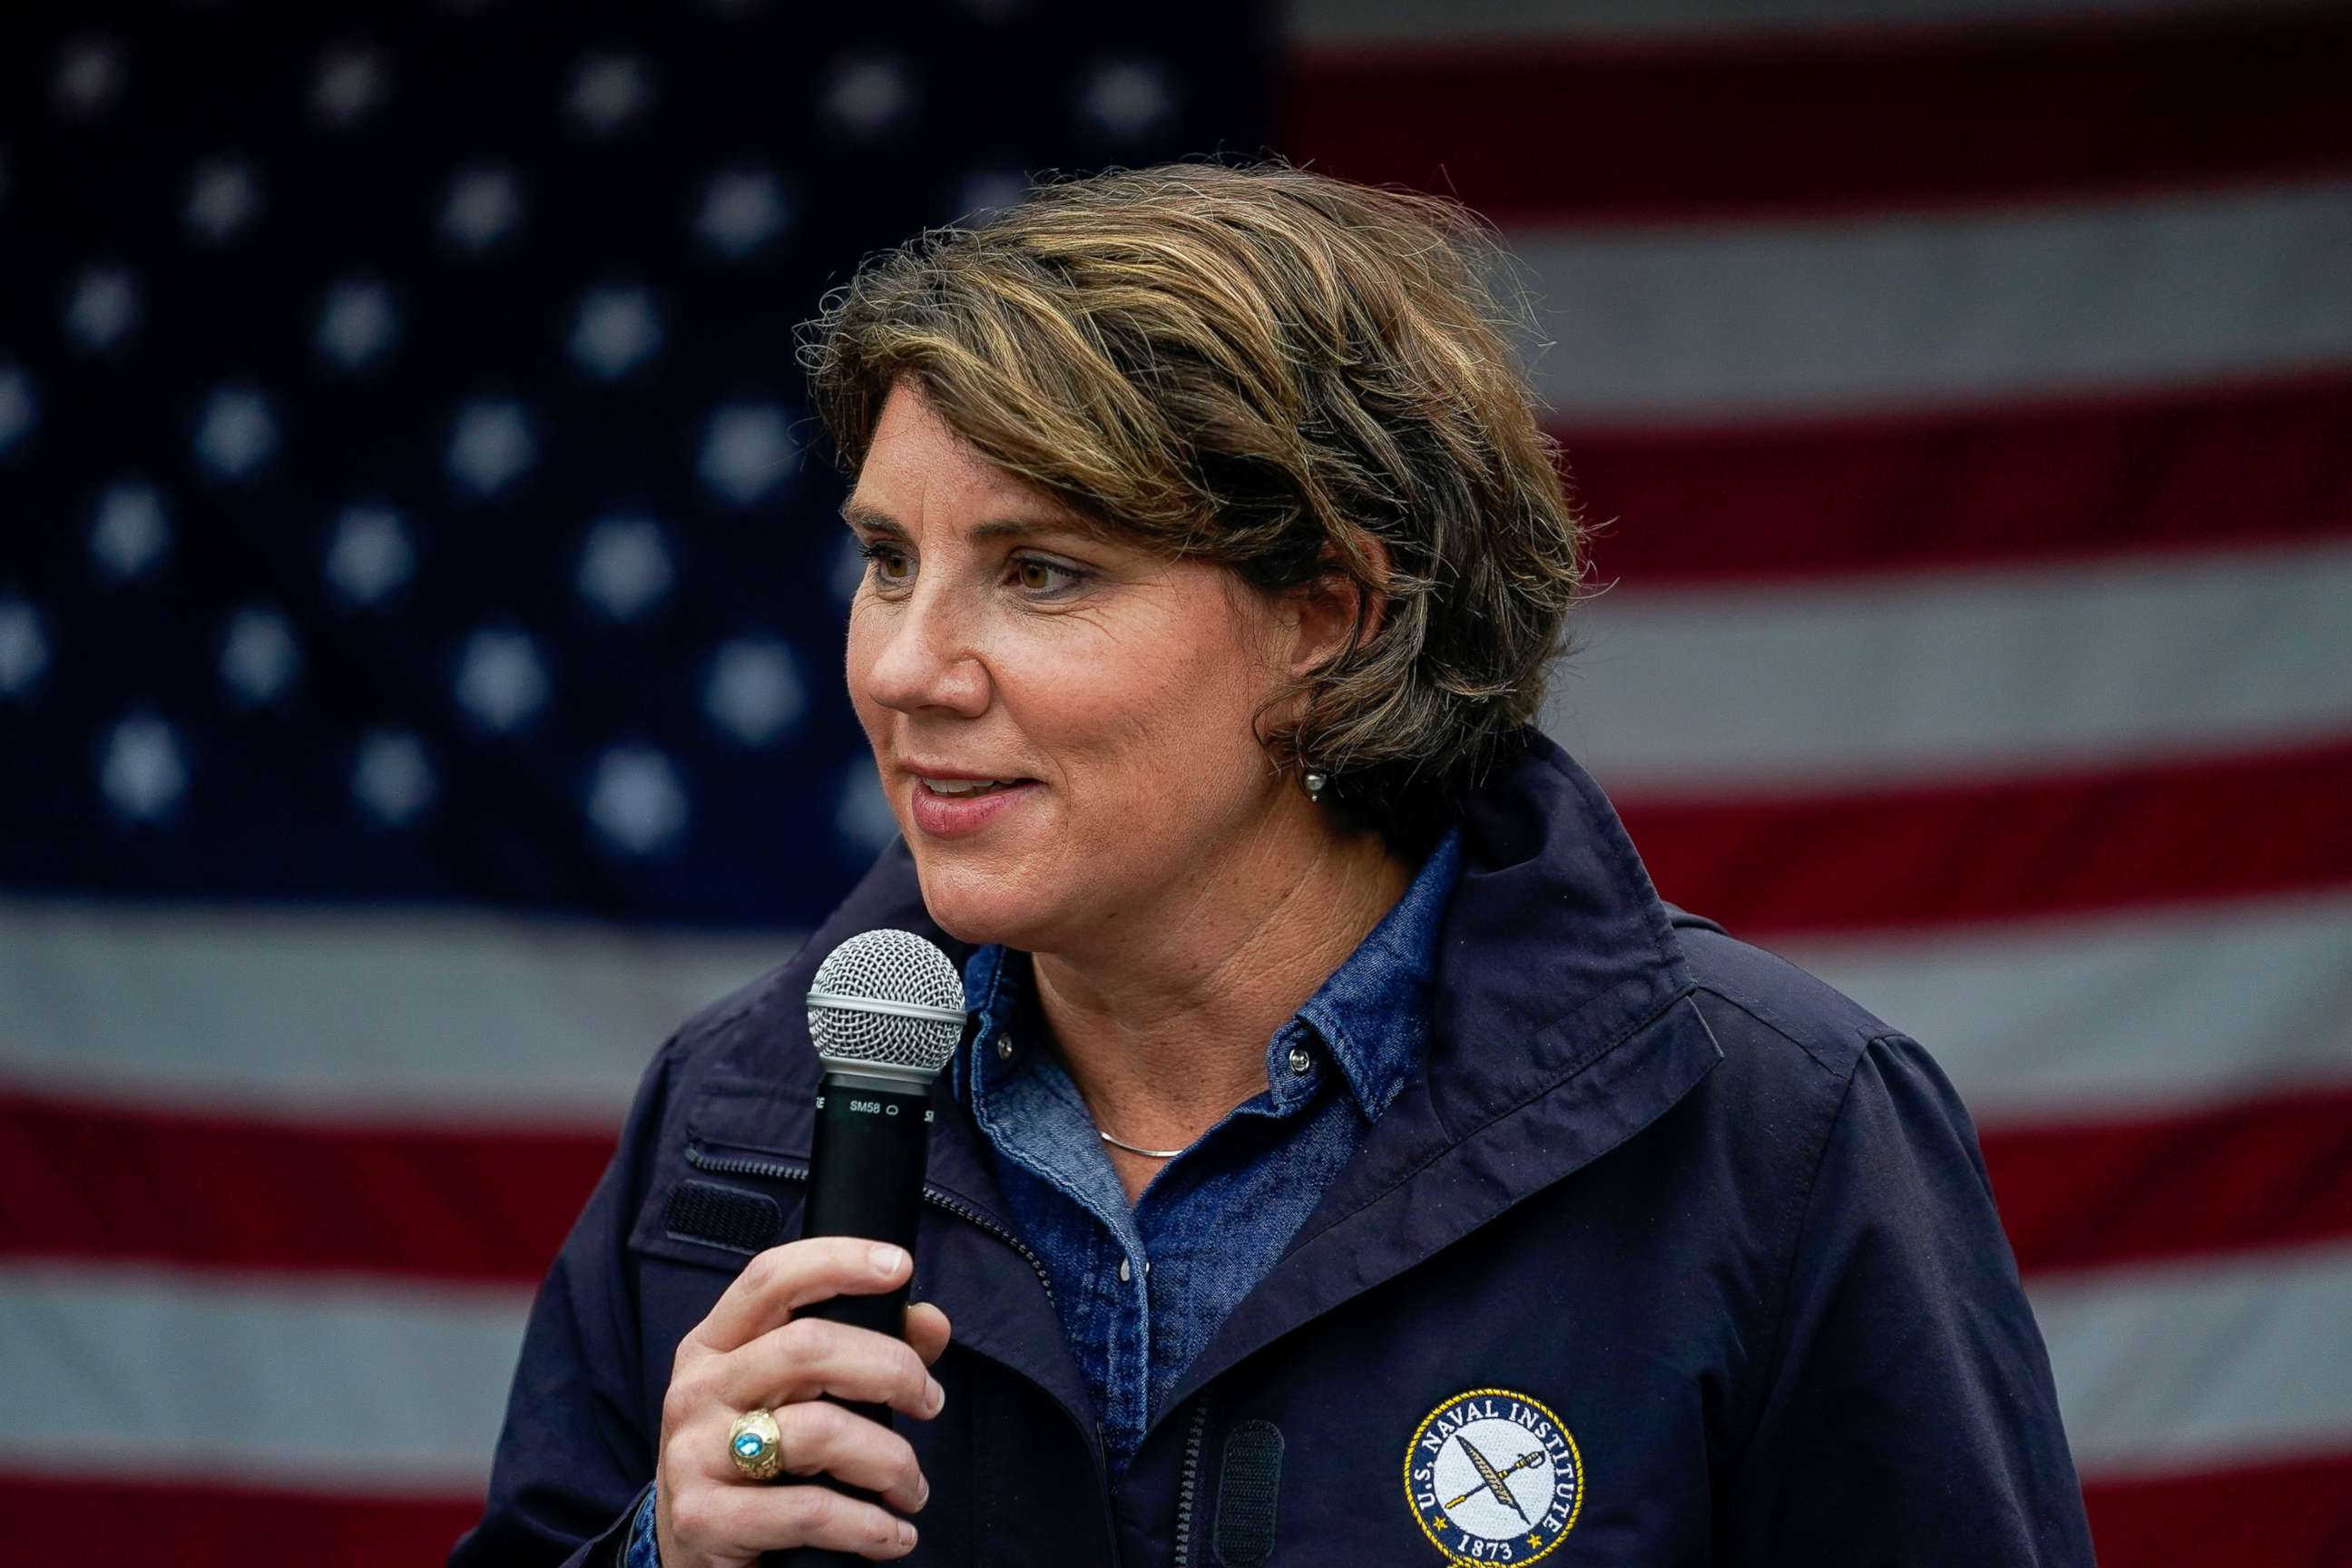 PHOTO: Democratic Senate candidate Amy McGrath speaks at a campaign event in Danville, Ky., Oct. 28, 2020.